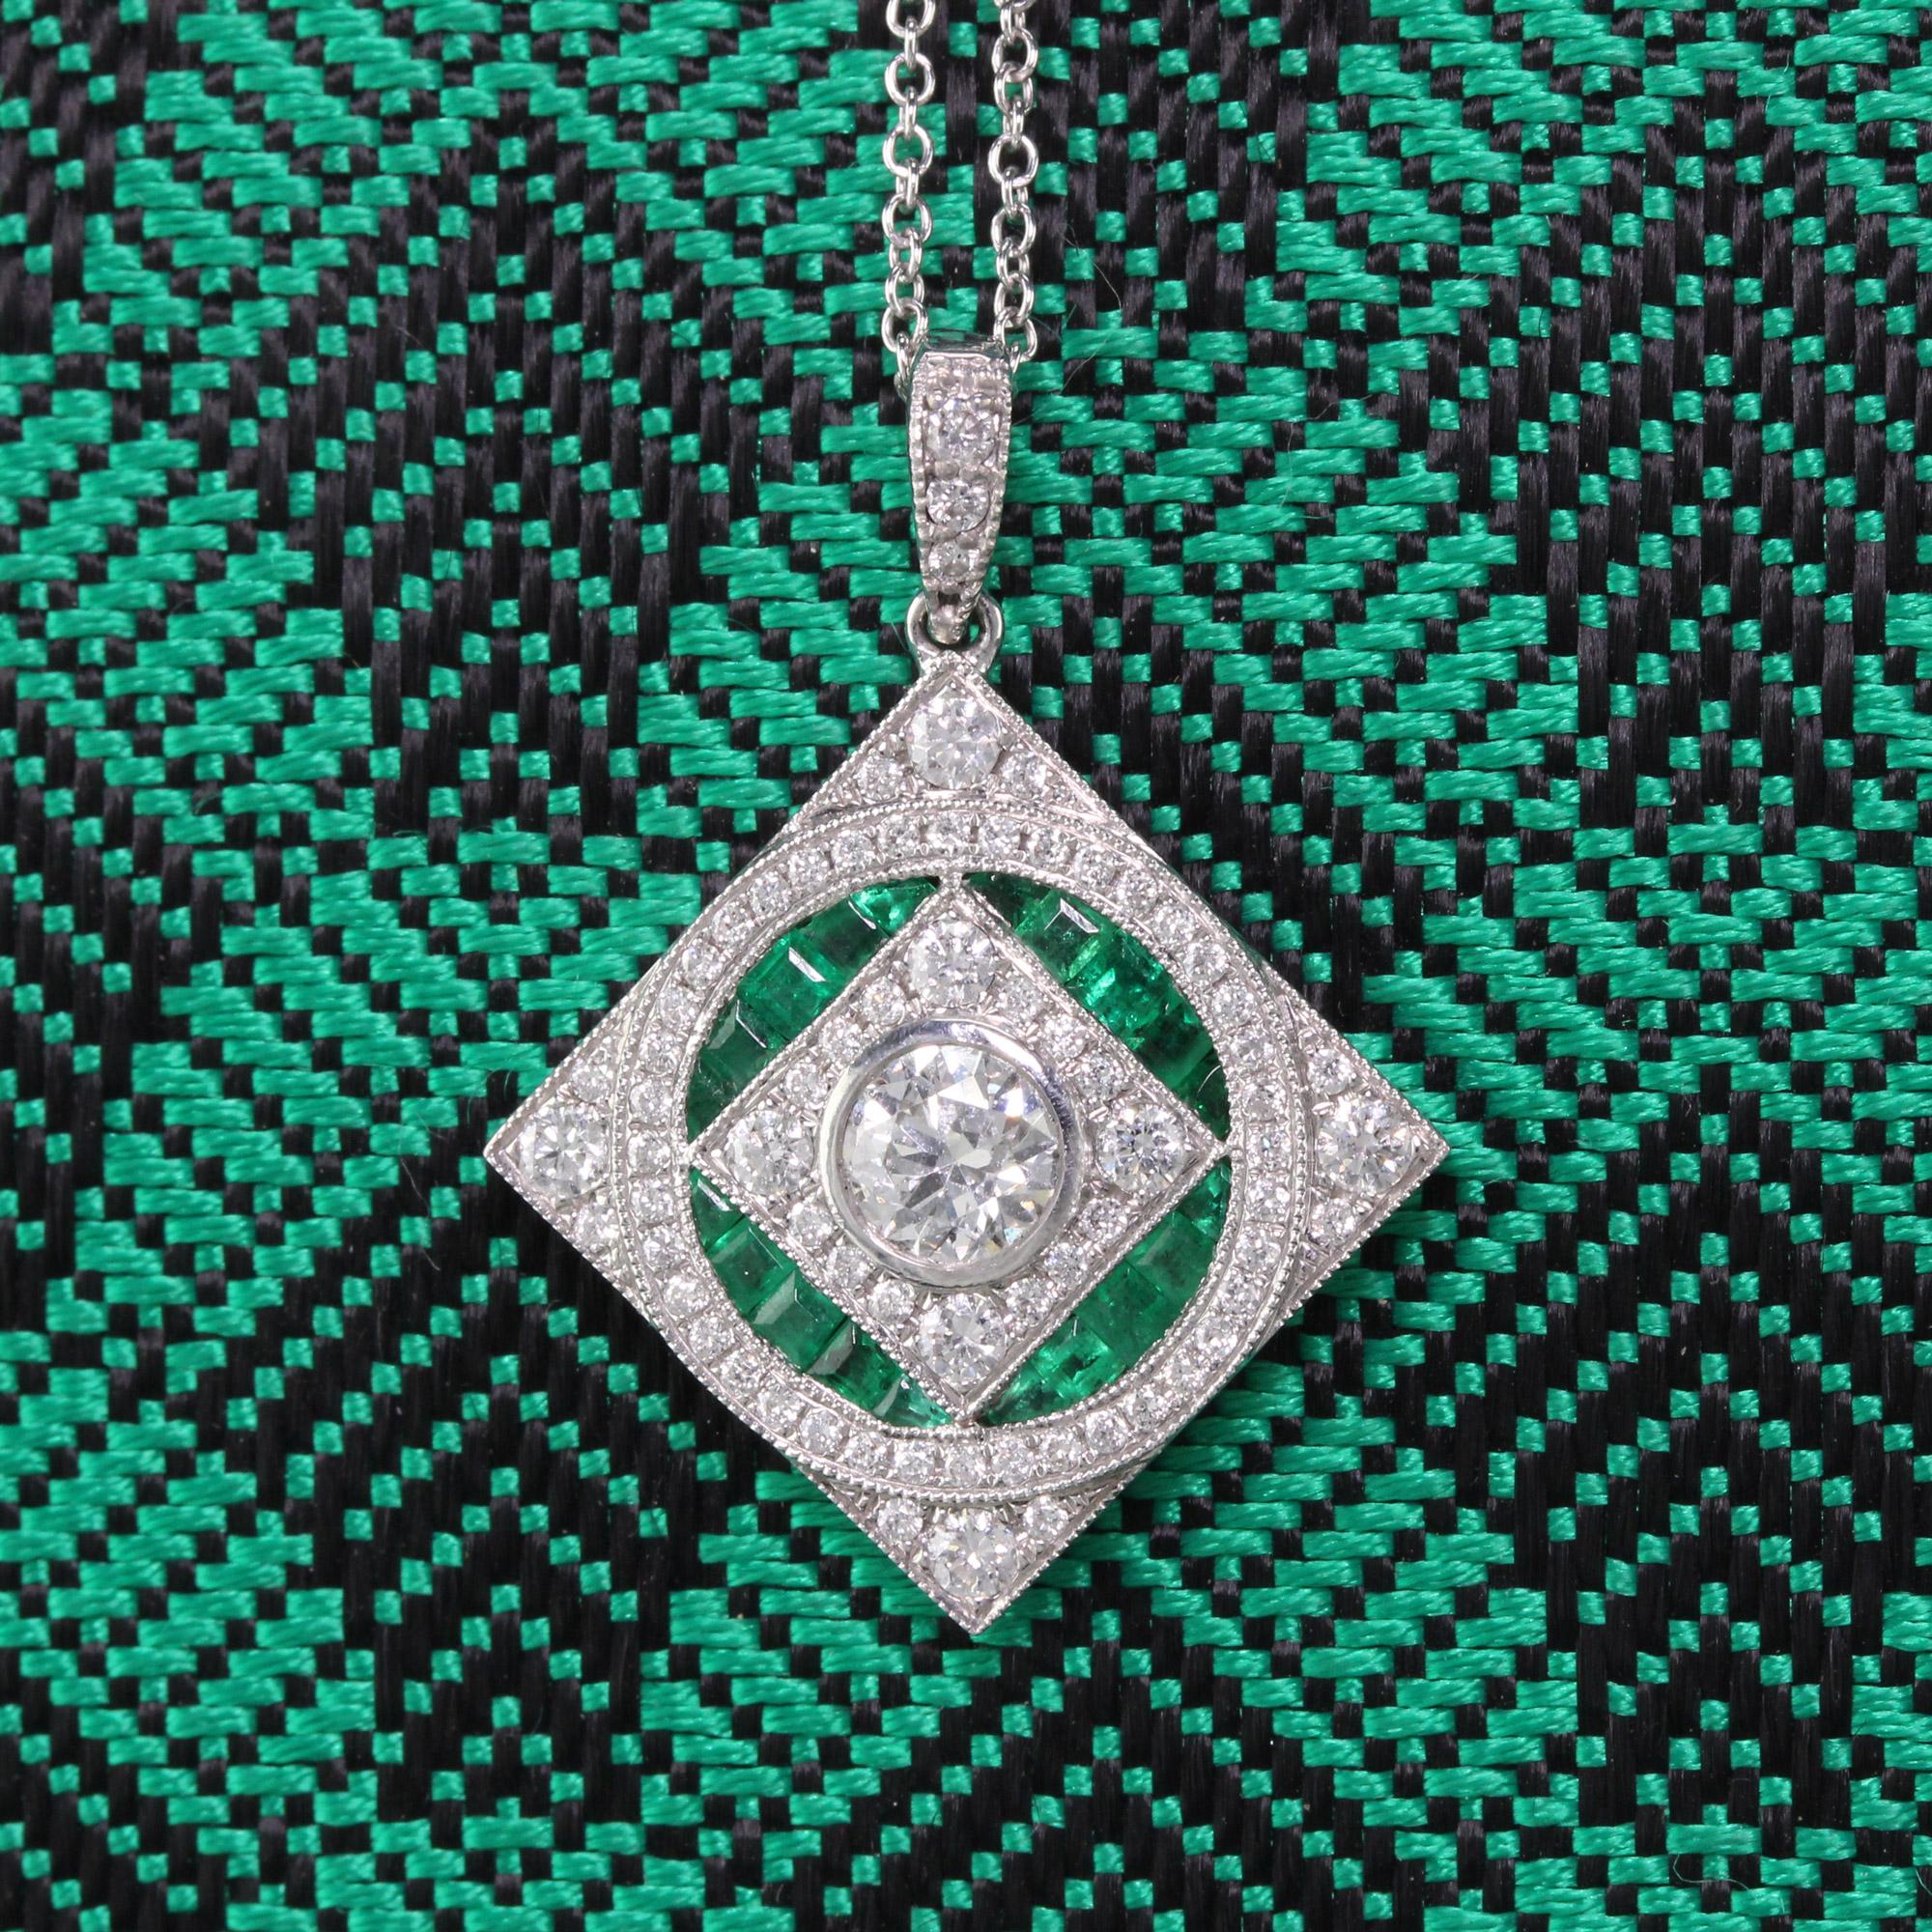 Gorgeous emerald and diamond pendant with dazzling diamond center.

Metal: 18K White Gold

Weight: 5.2 Grams

Diamond Weight: Approximately 1 ct.

Diamond Color: G

Diamond Clarity: VS2

Gemstone Weight: Approximately 0.70 ct. emerald

Measurements: